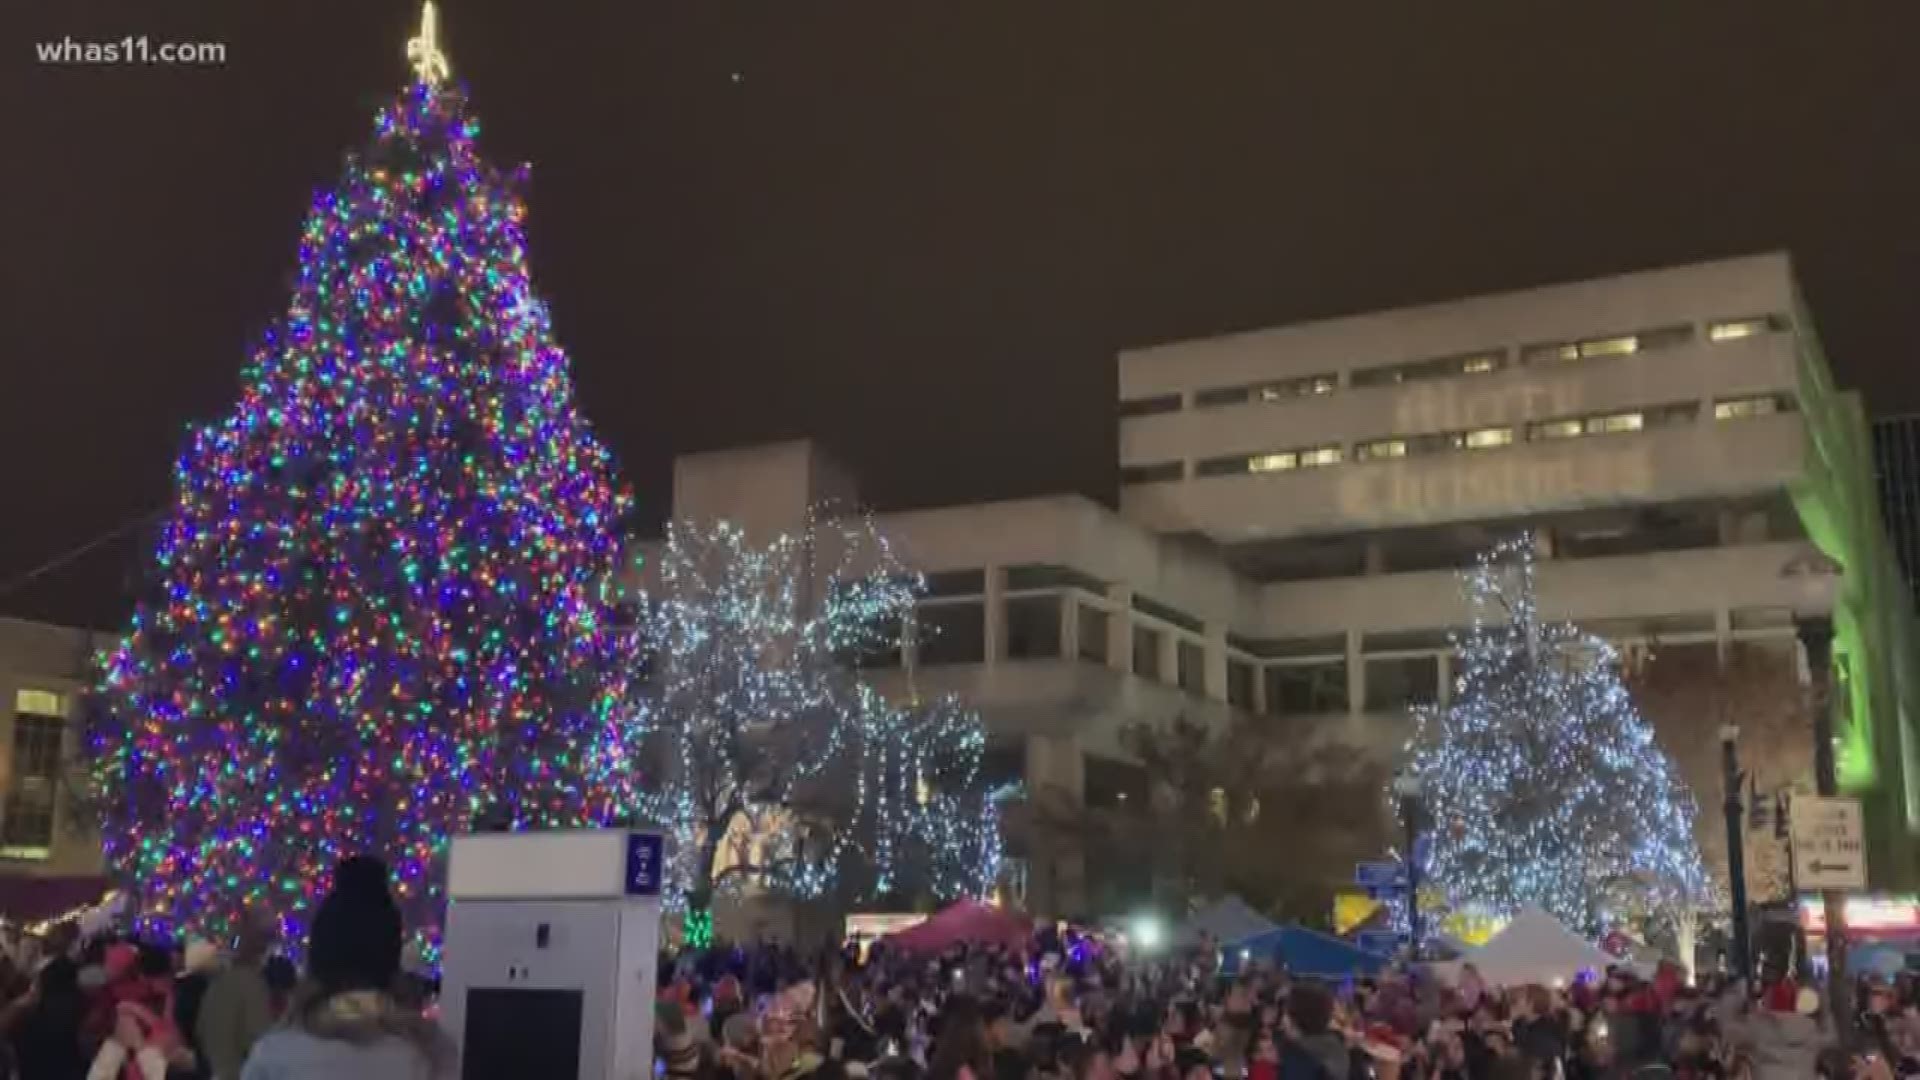 2019's Light up Louisville was all about getting into the Christmas spirit.